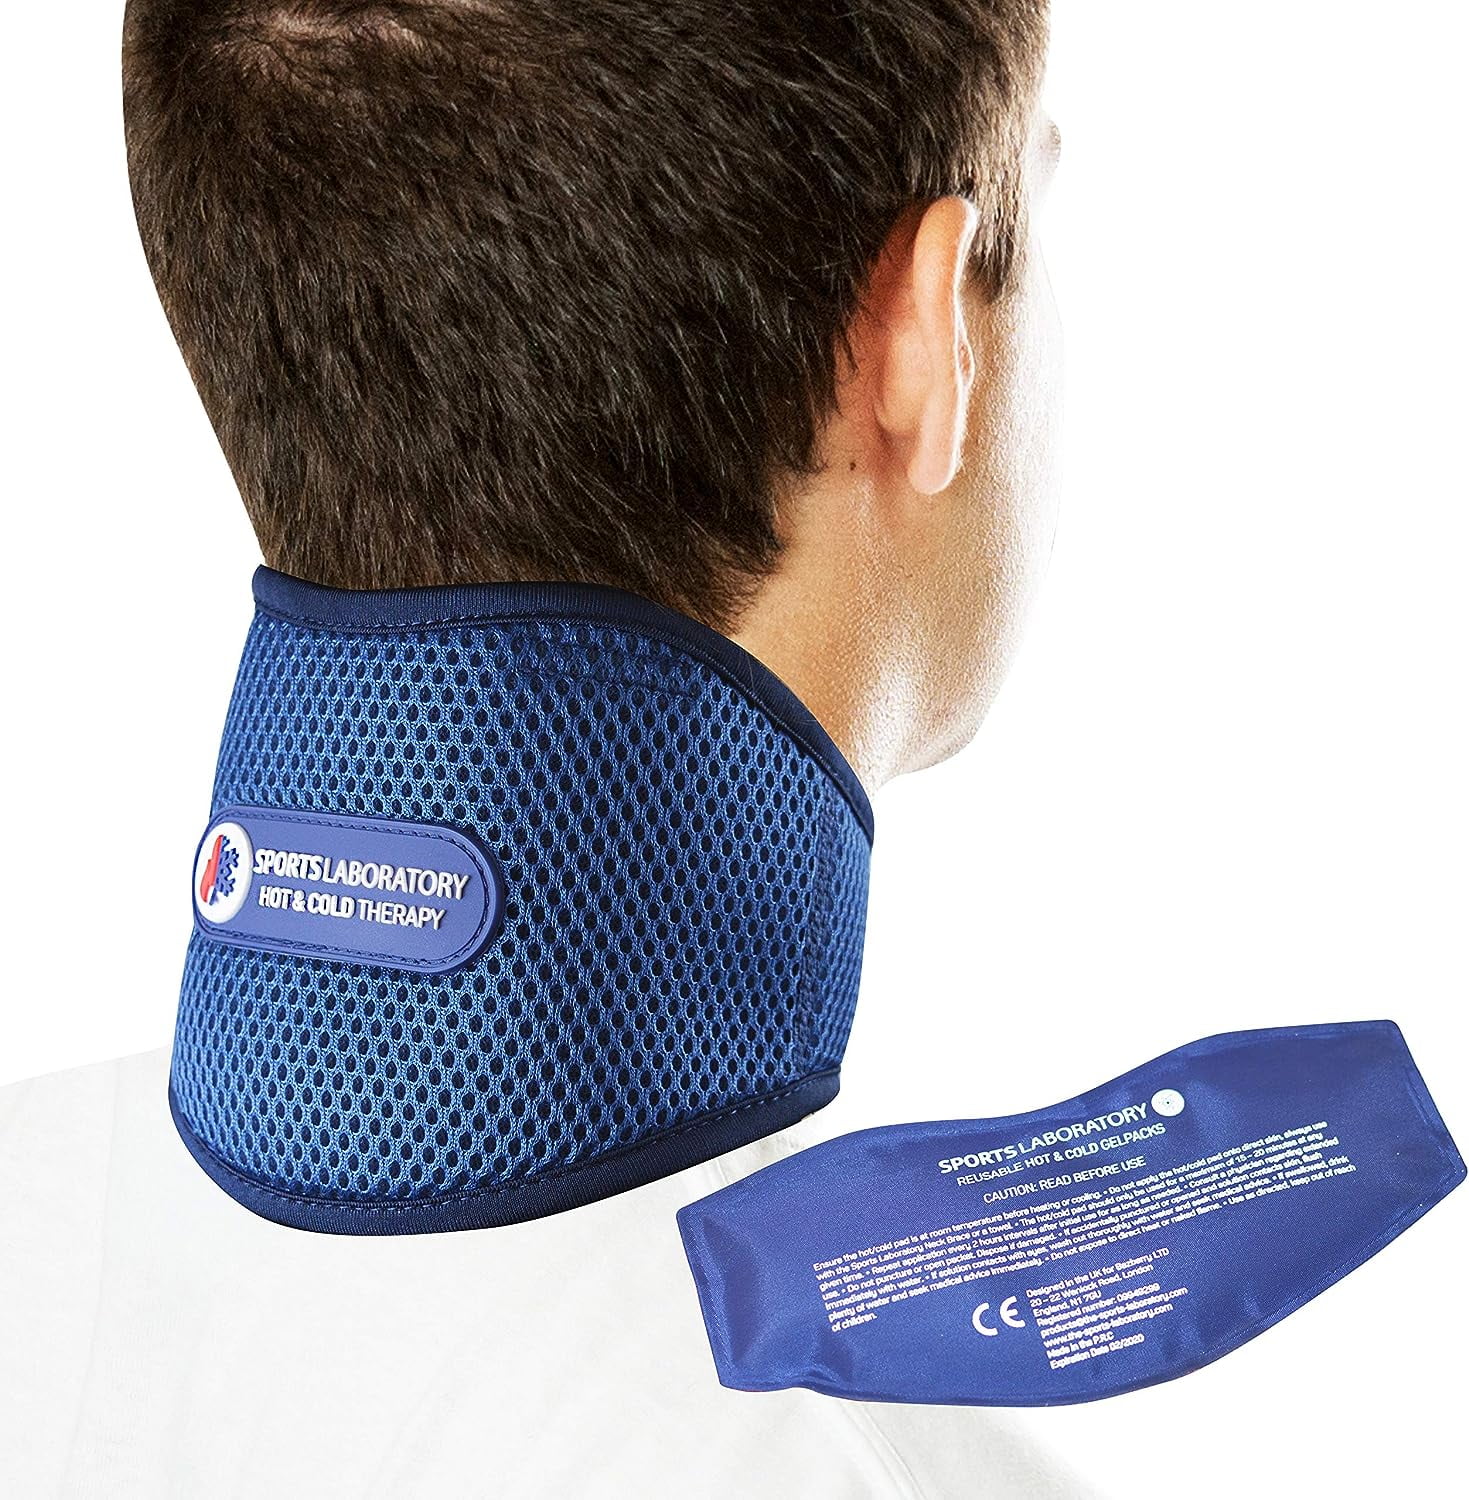 Cervicorrect Neck Brace By Healthy Lab Neck Brace For Neck Pain And Support  USA